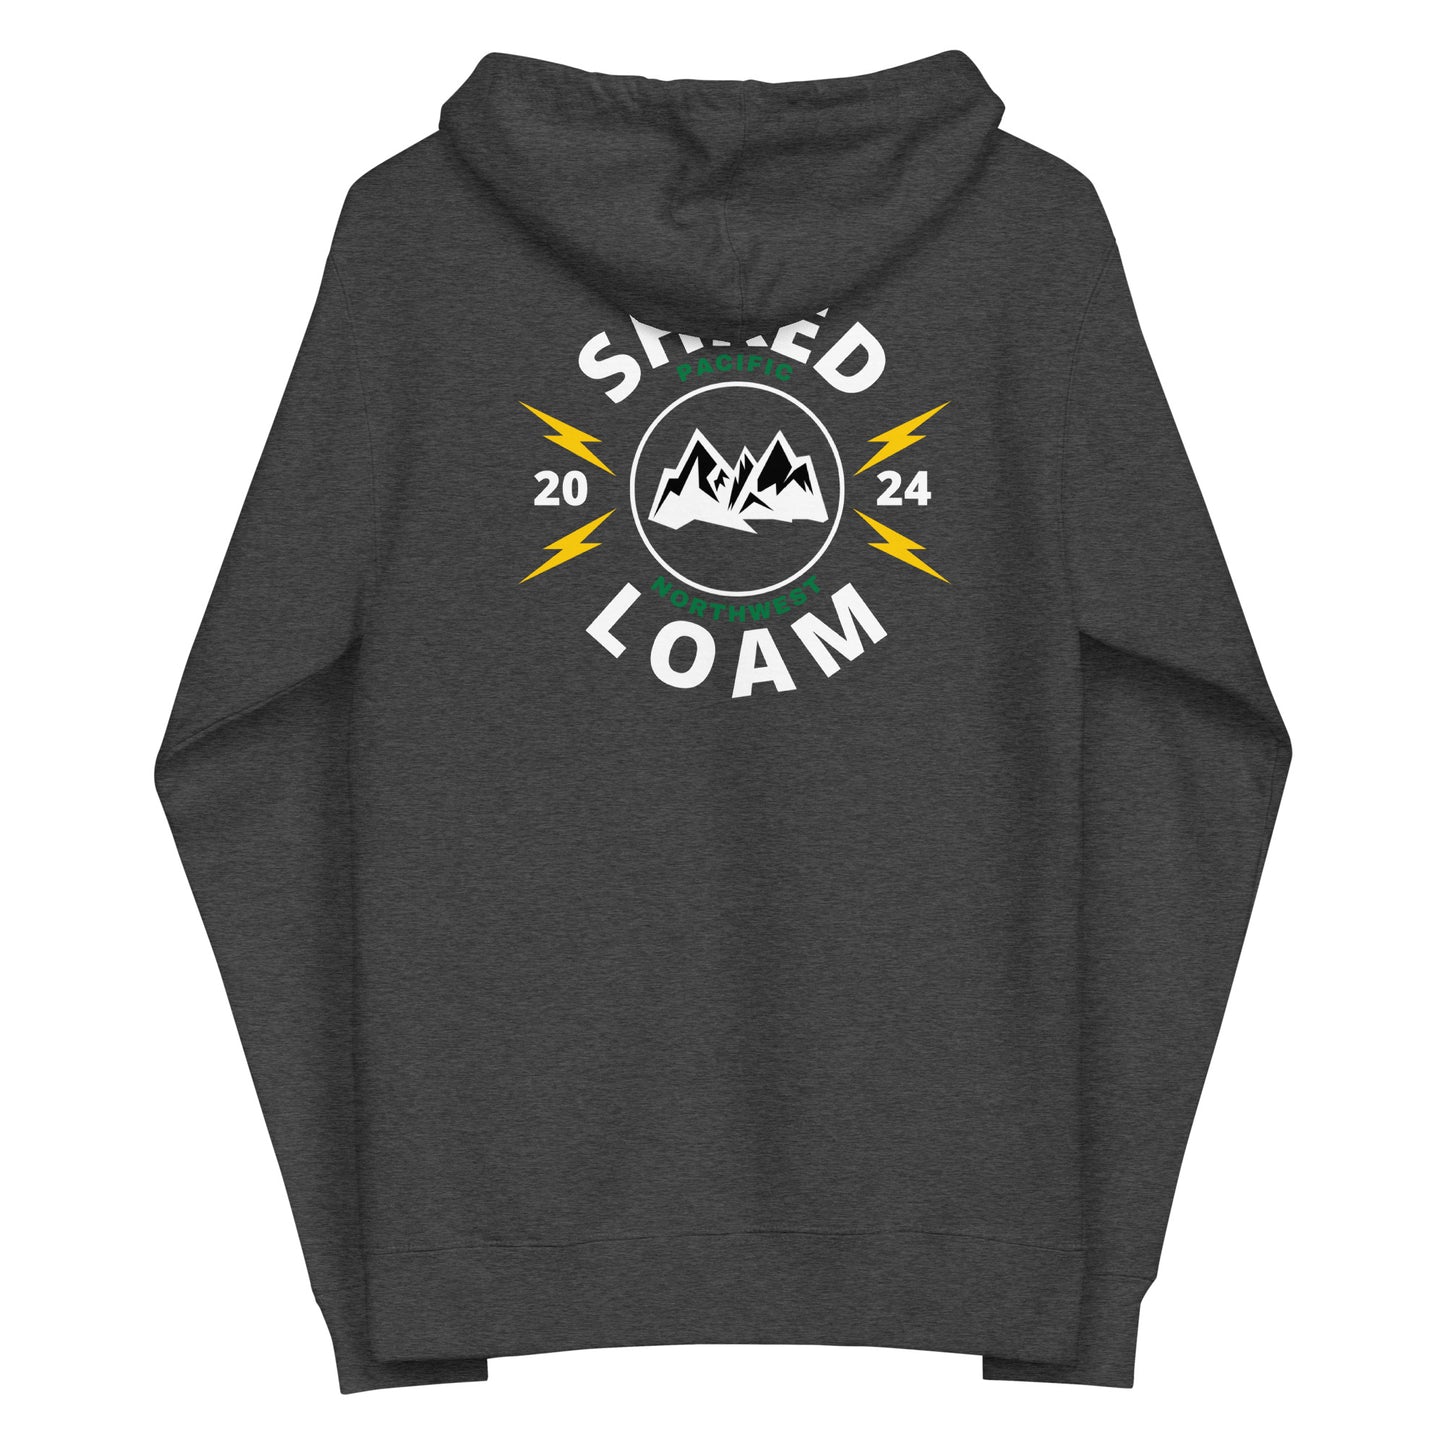 Shred PNW Loam - Zip Up